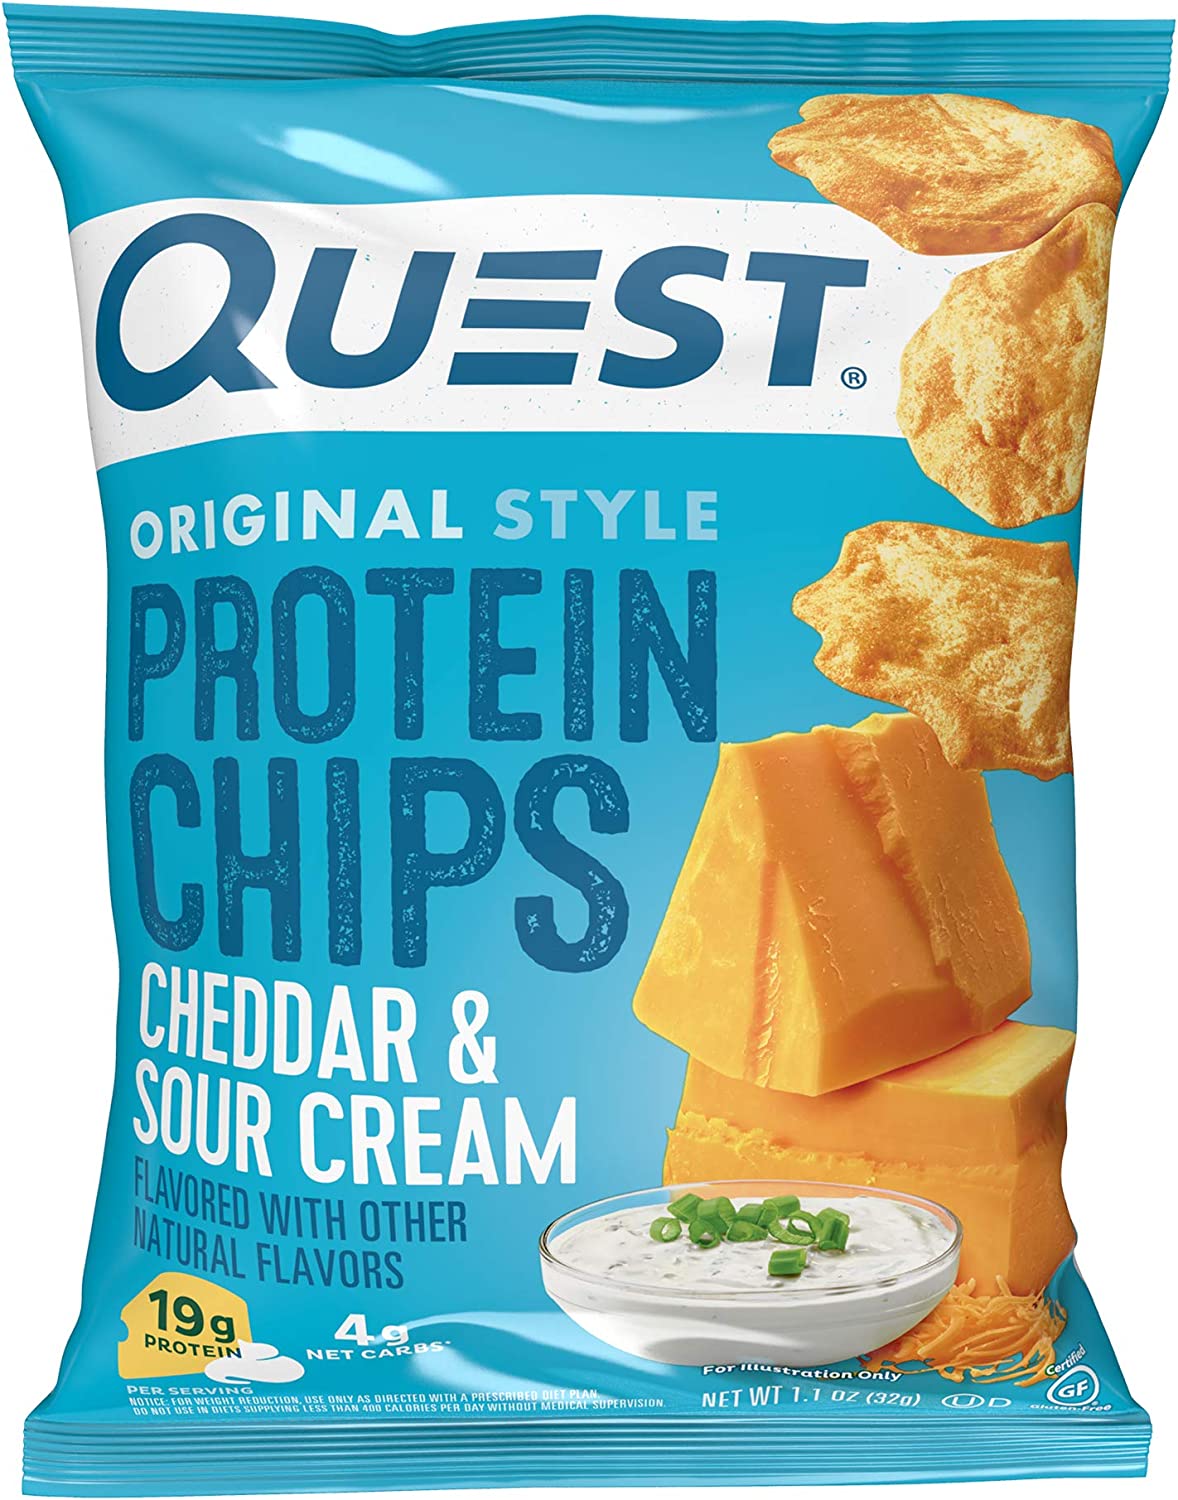 Cheddar & Sour Cream (Quest Chips)